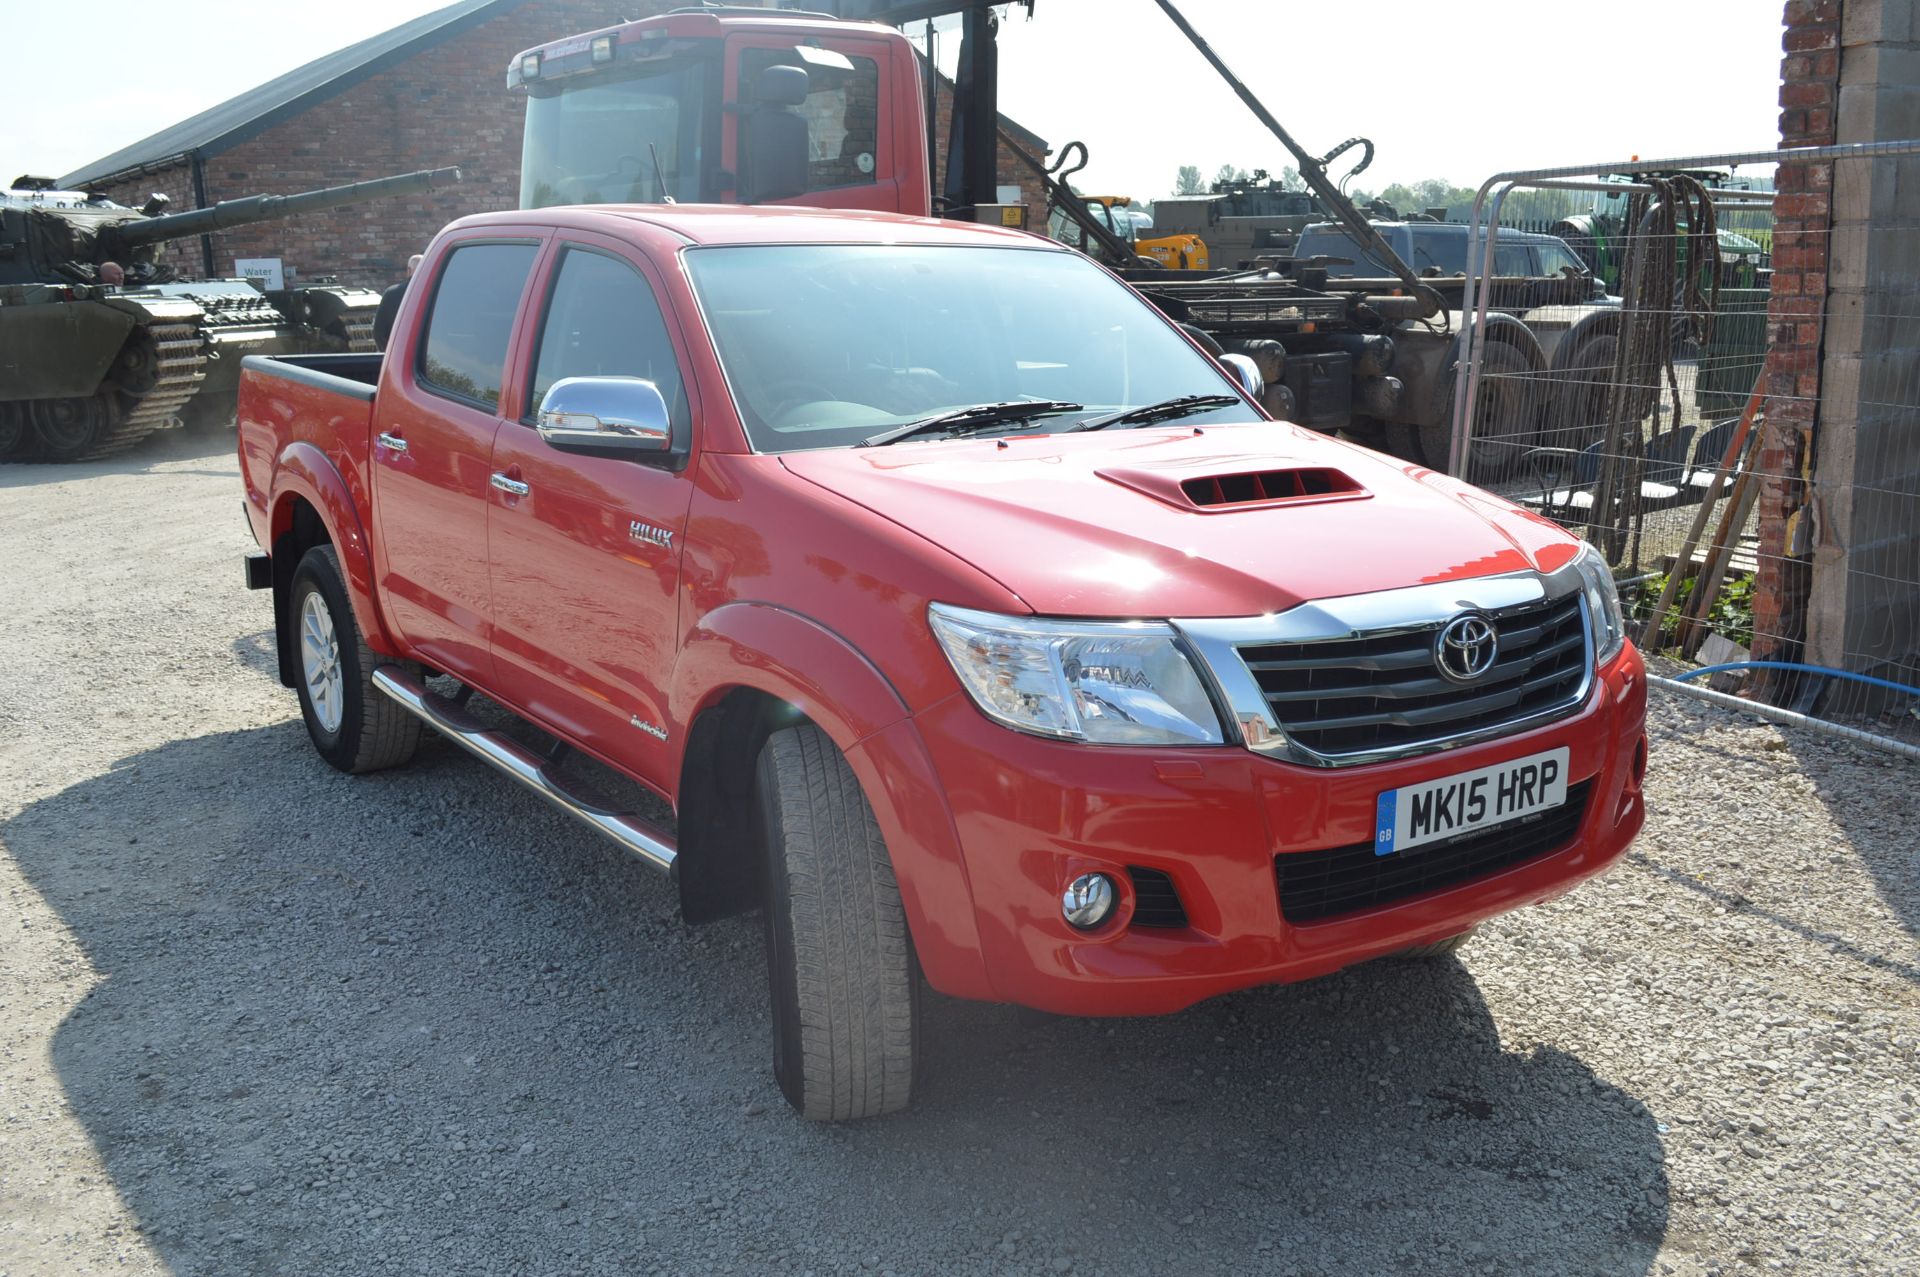 Toyota HiLUX INVINCIBLE AUTO DOUBLE CAB DIESEL PICKUP, registartion no. MK15 HRP, date first